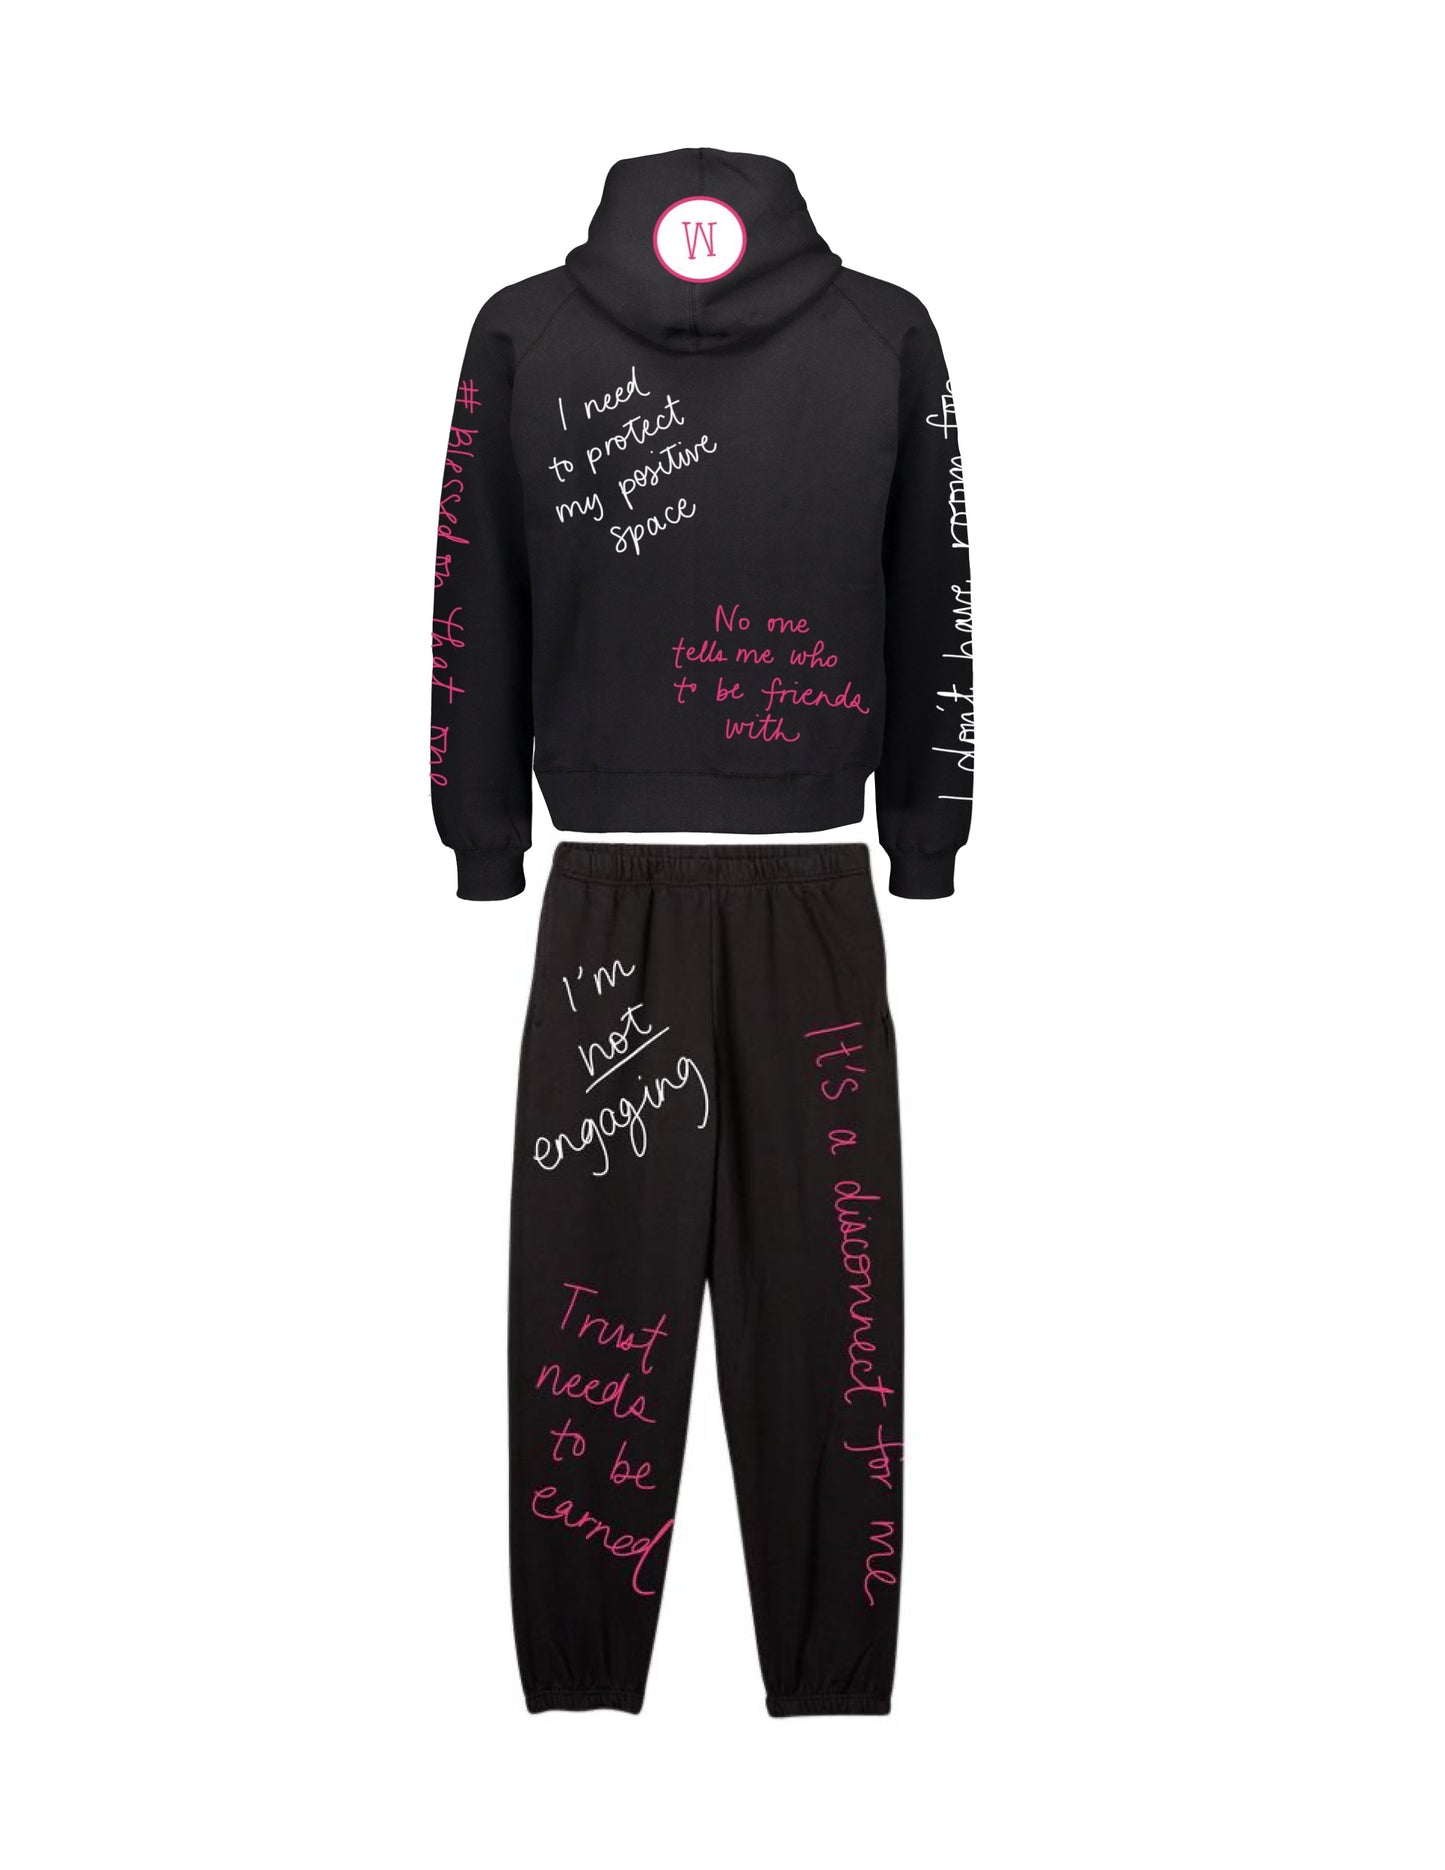 Limited Edition Meredith Marks Sweatsuit